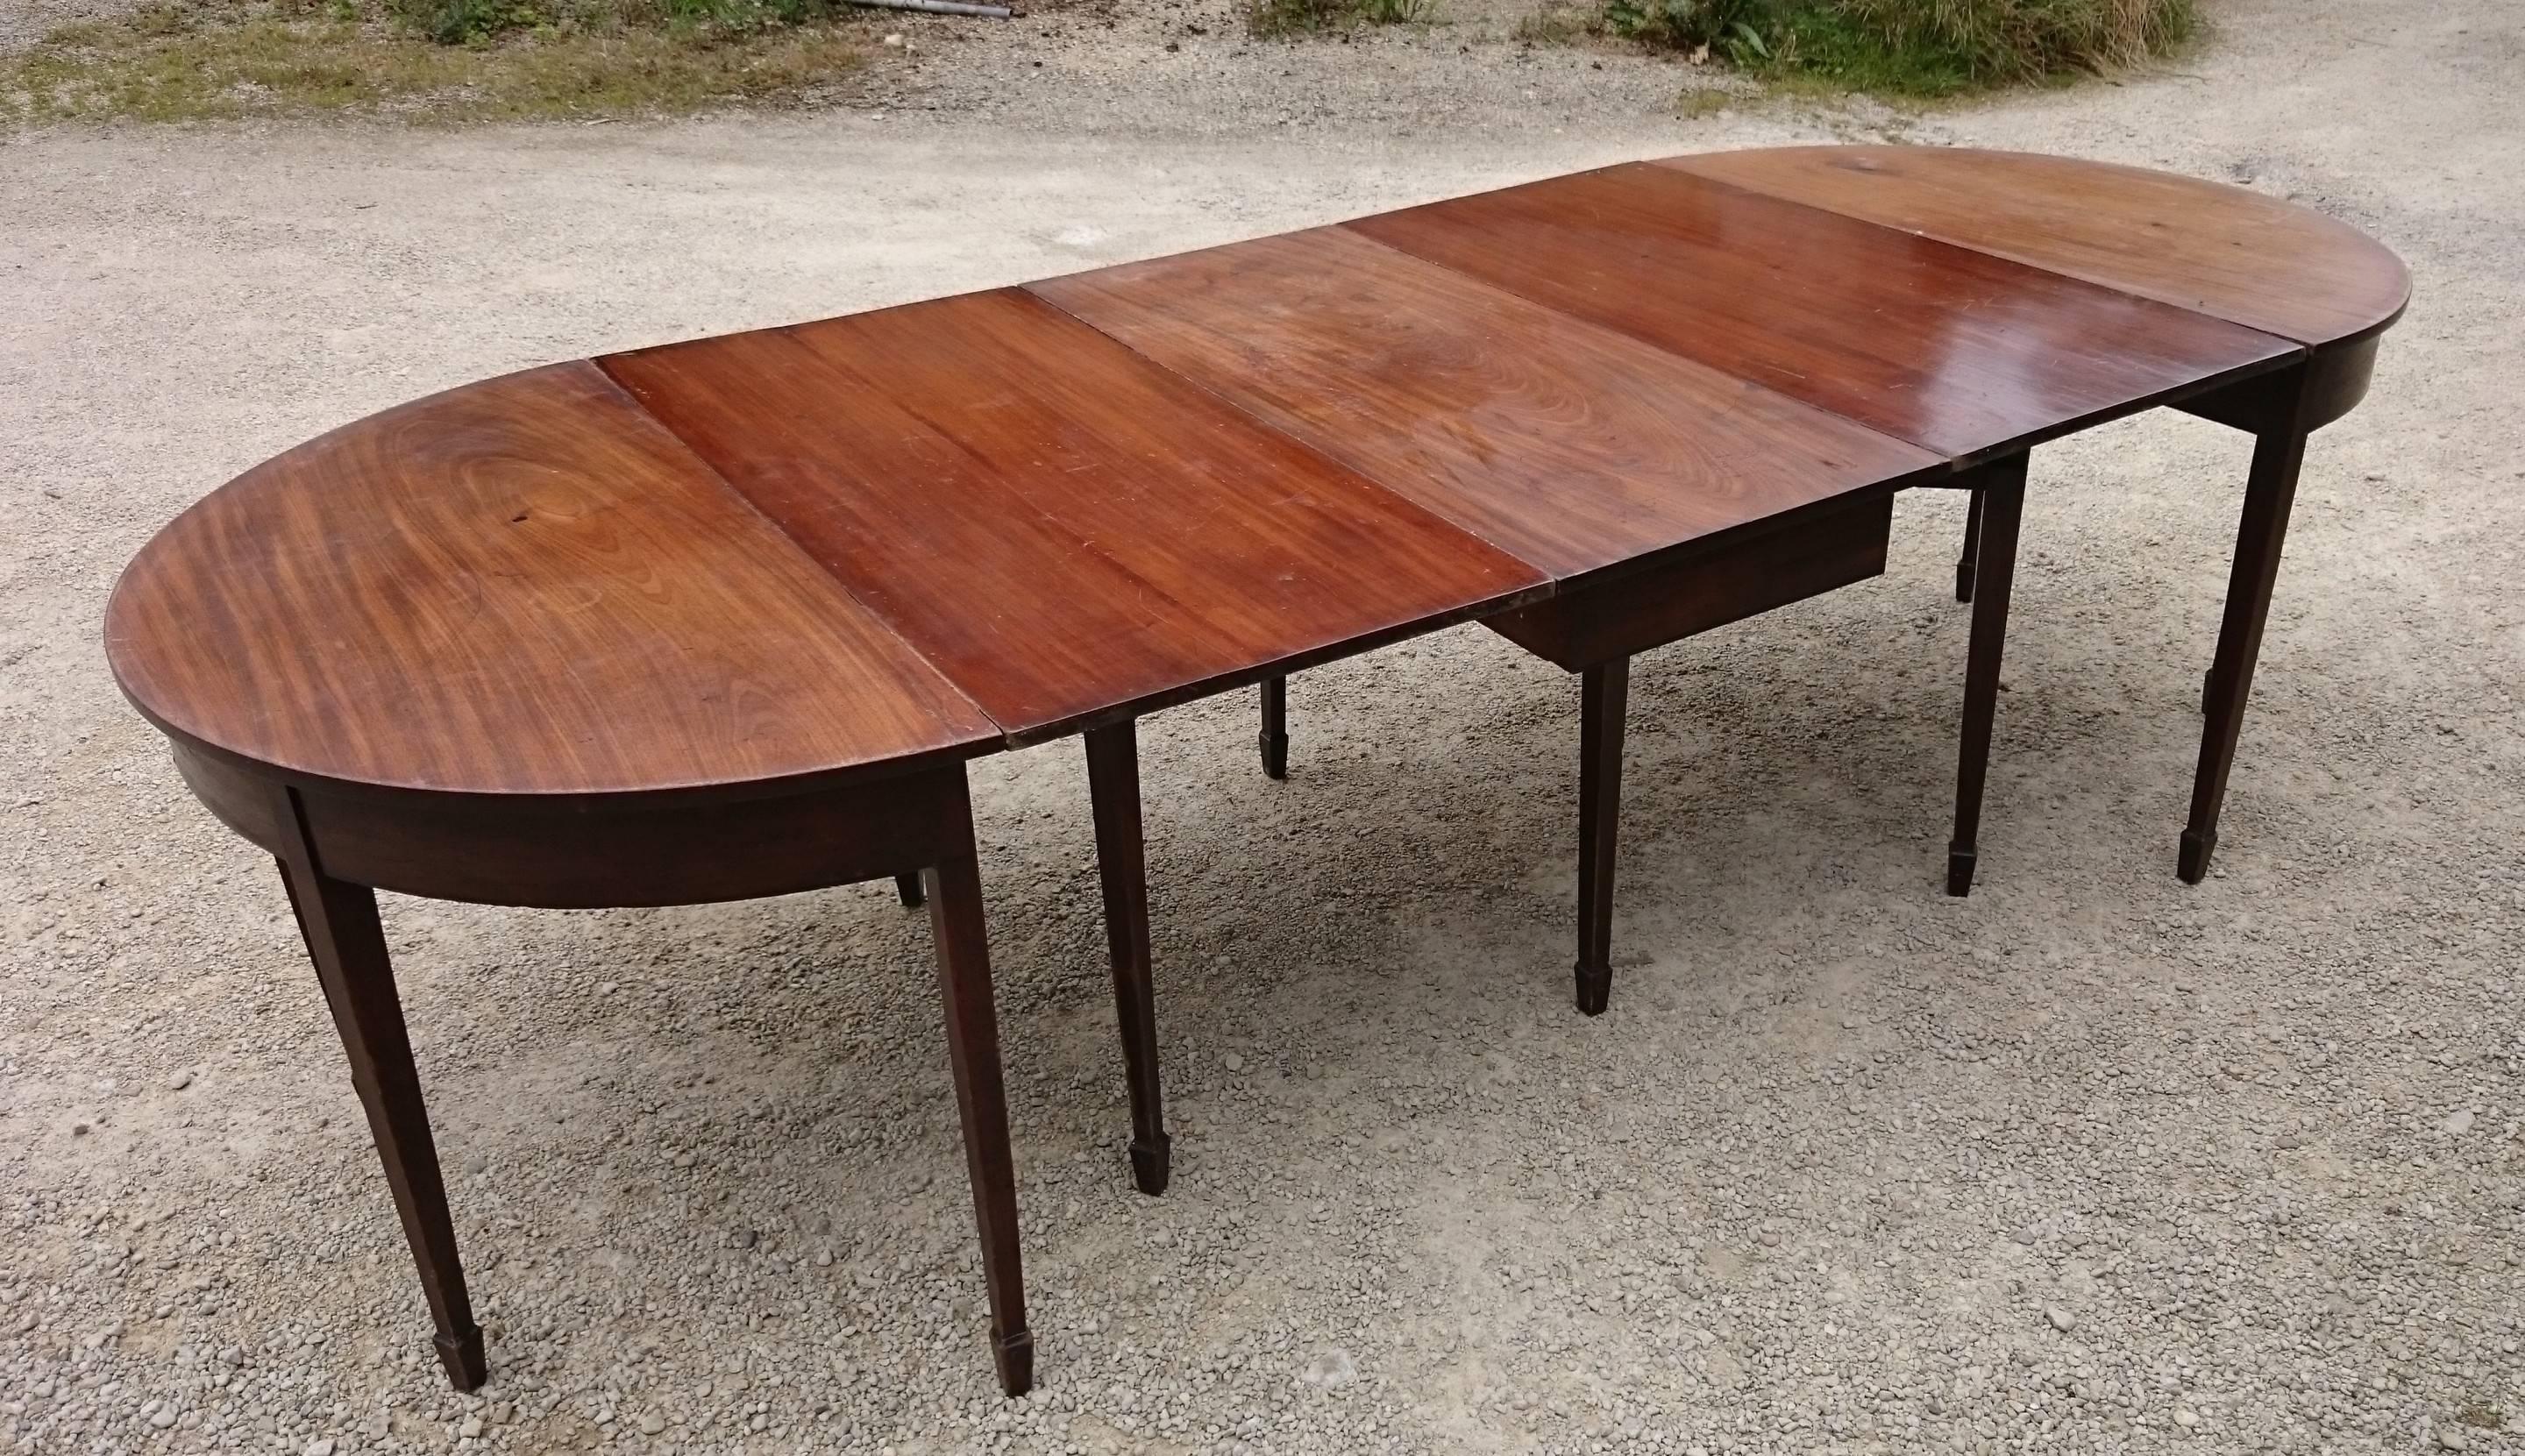 Great Britain (UK) Antique D-End Dining Table, Finest Cuban Mahogany